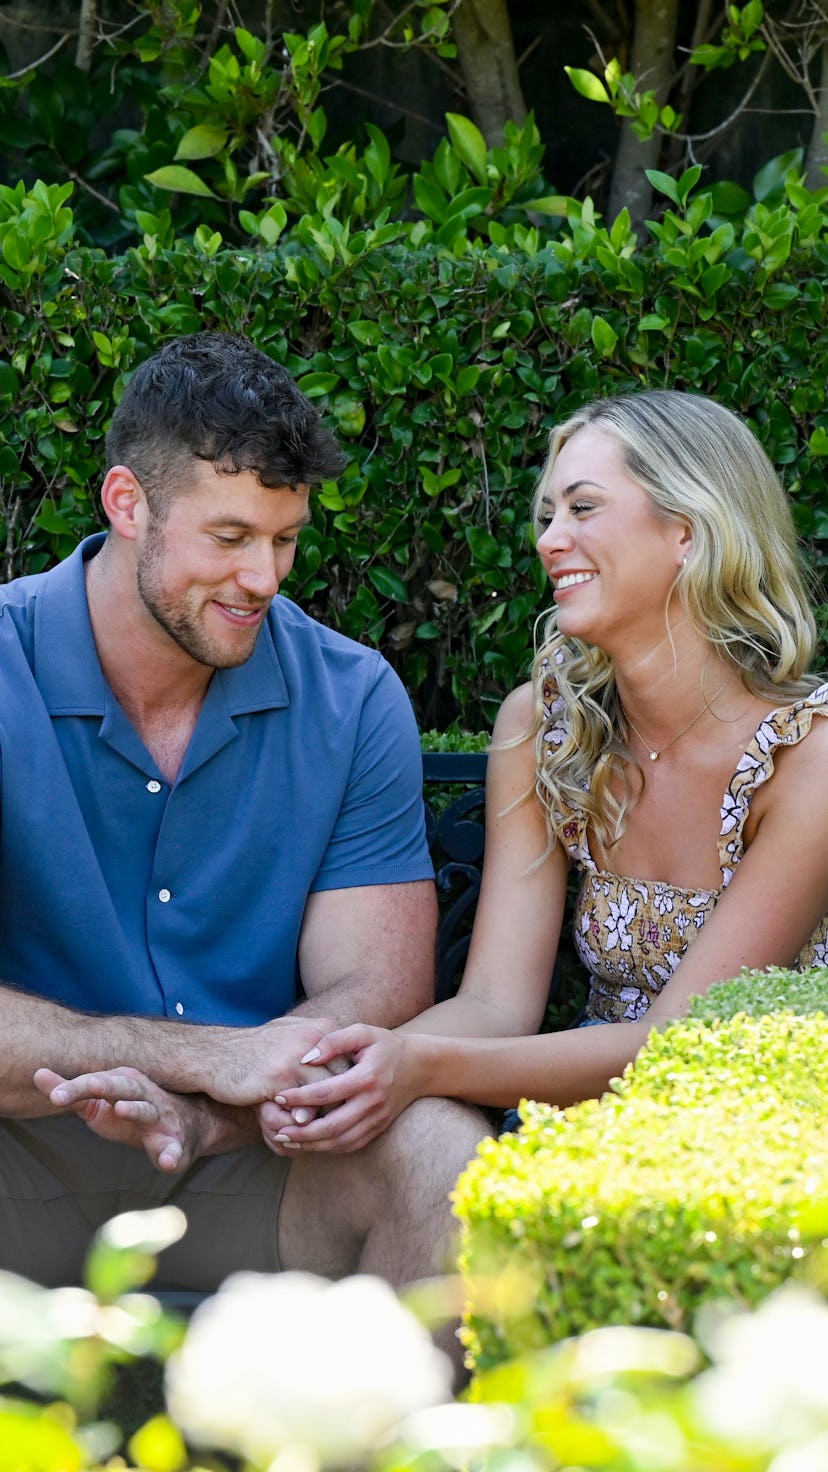 Clayton Echard and Cassidy Timbrooks on 'The Bachelor'